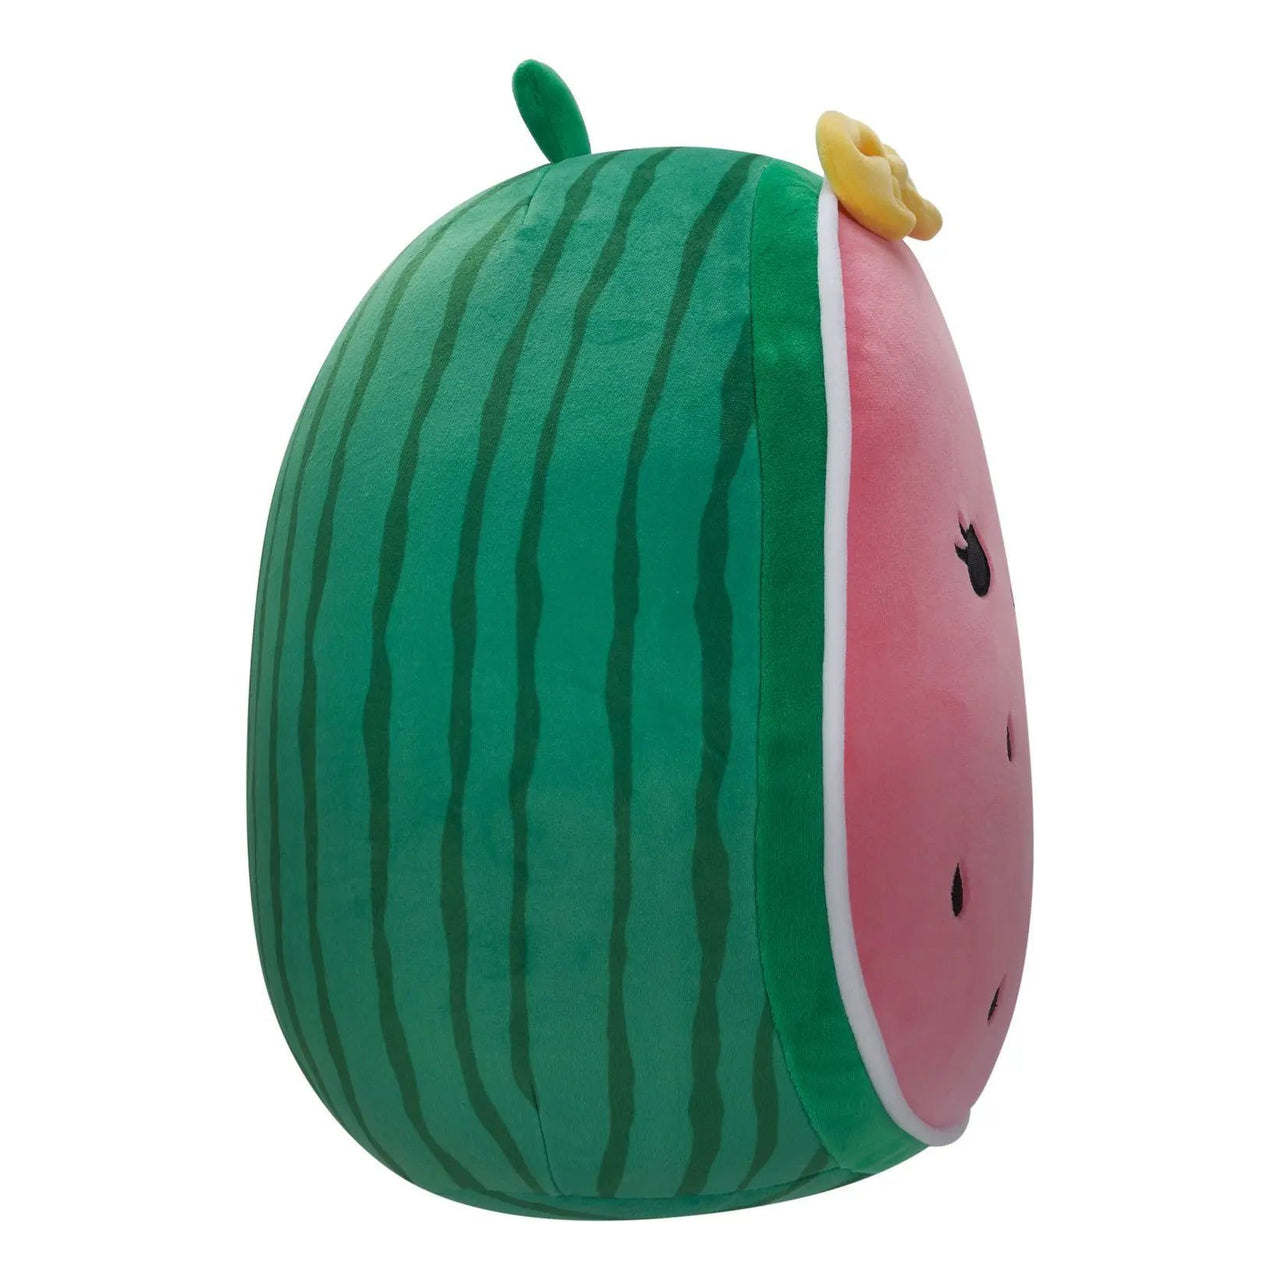 Squishmallows 12" Wanda the Pink Watermelon with Seeds Plush Squishmallows